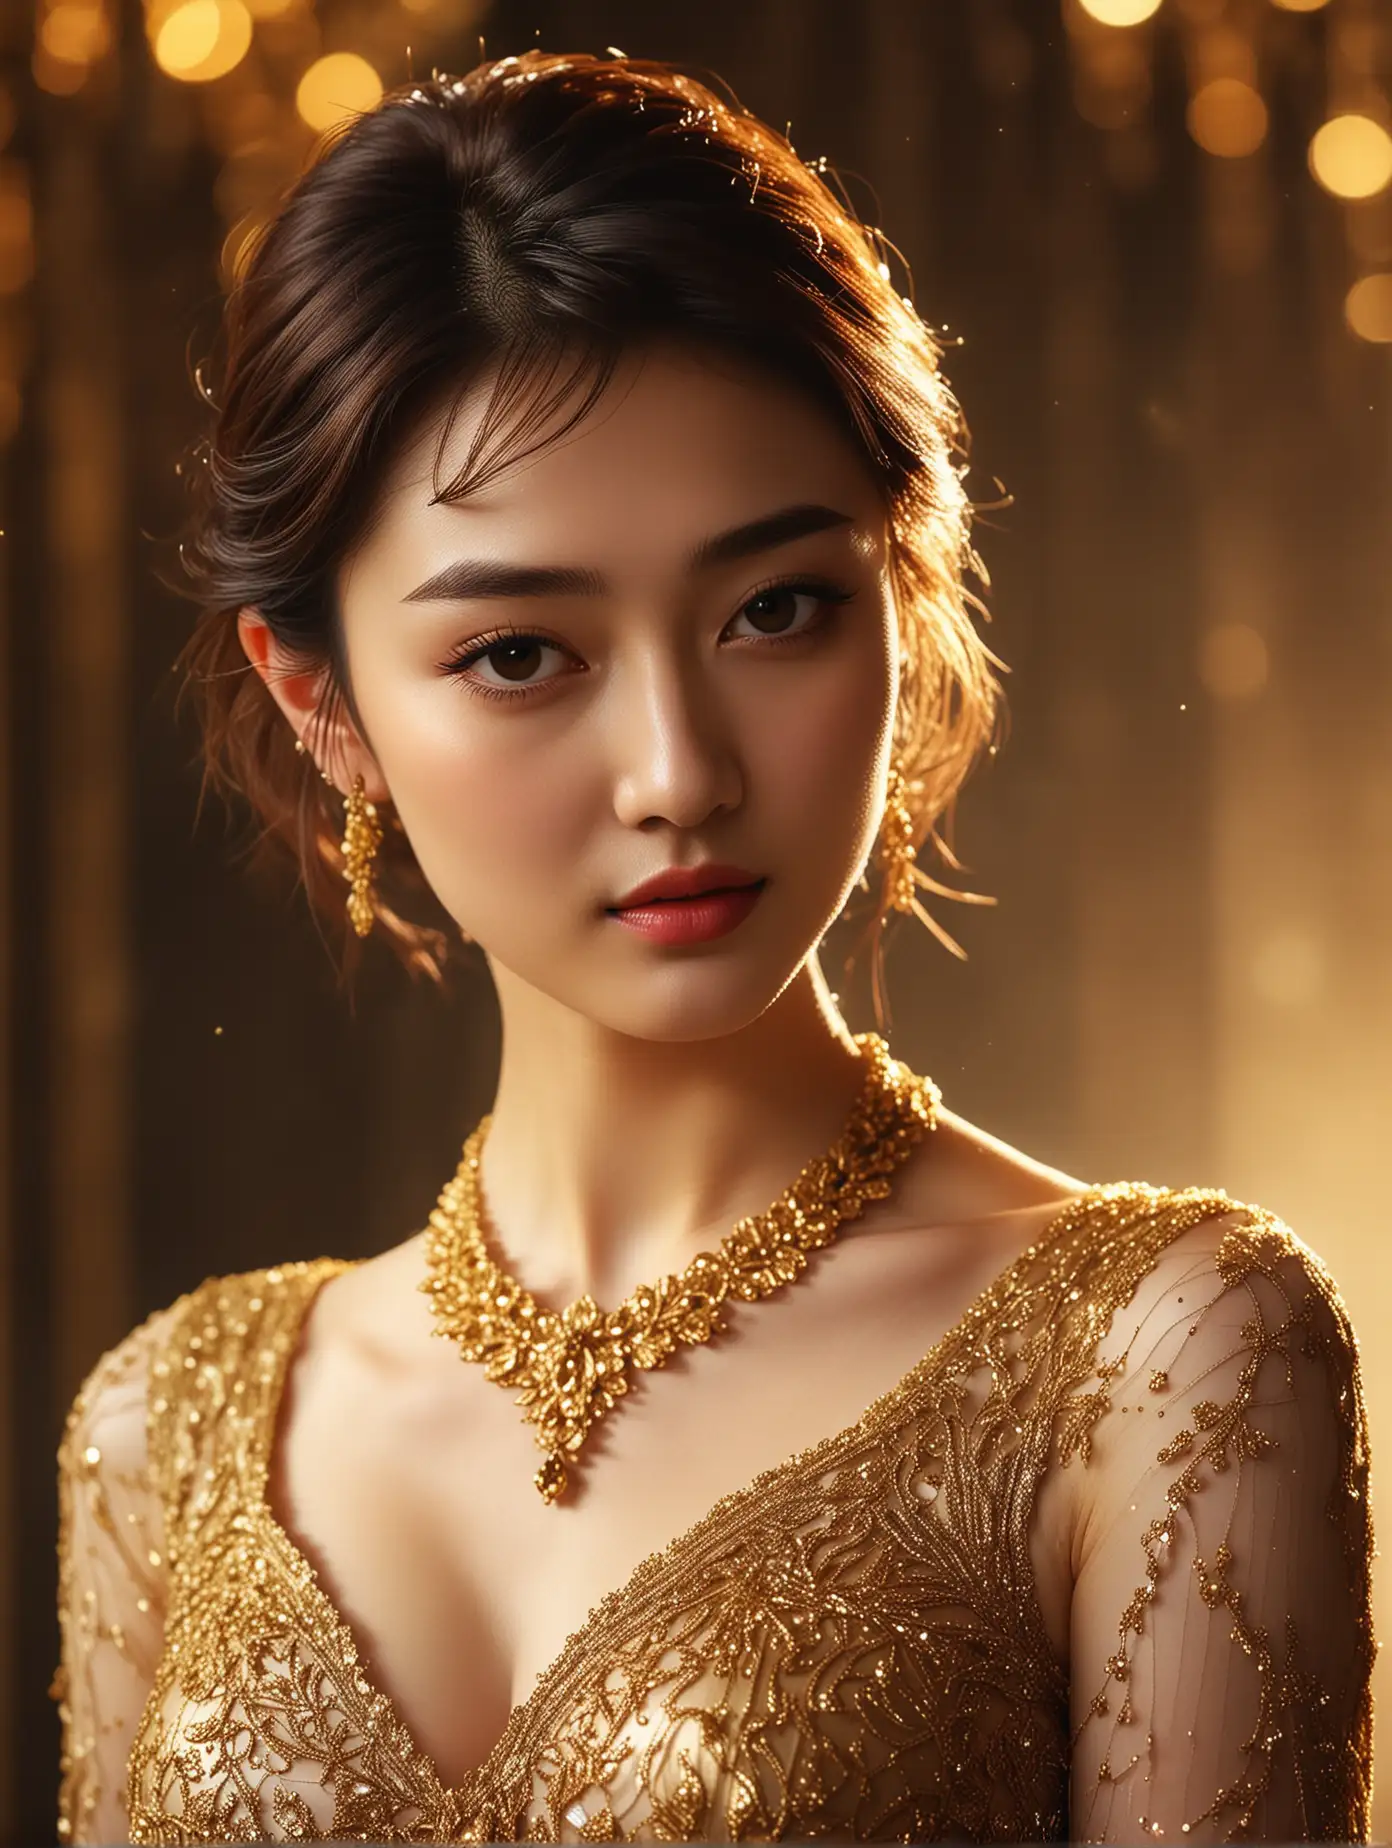 Jing Tian in Majestic Gold Lace Dress under Cinematic Lights